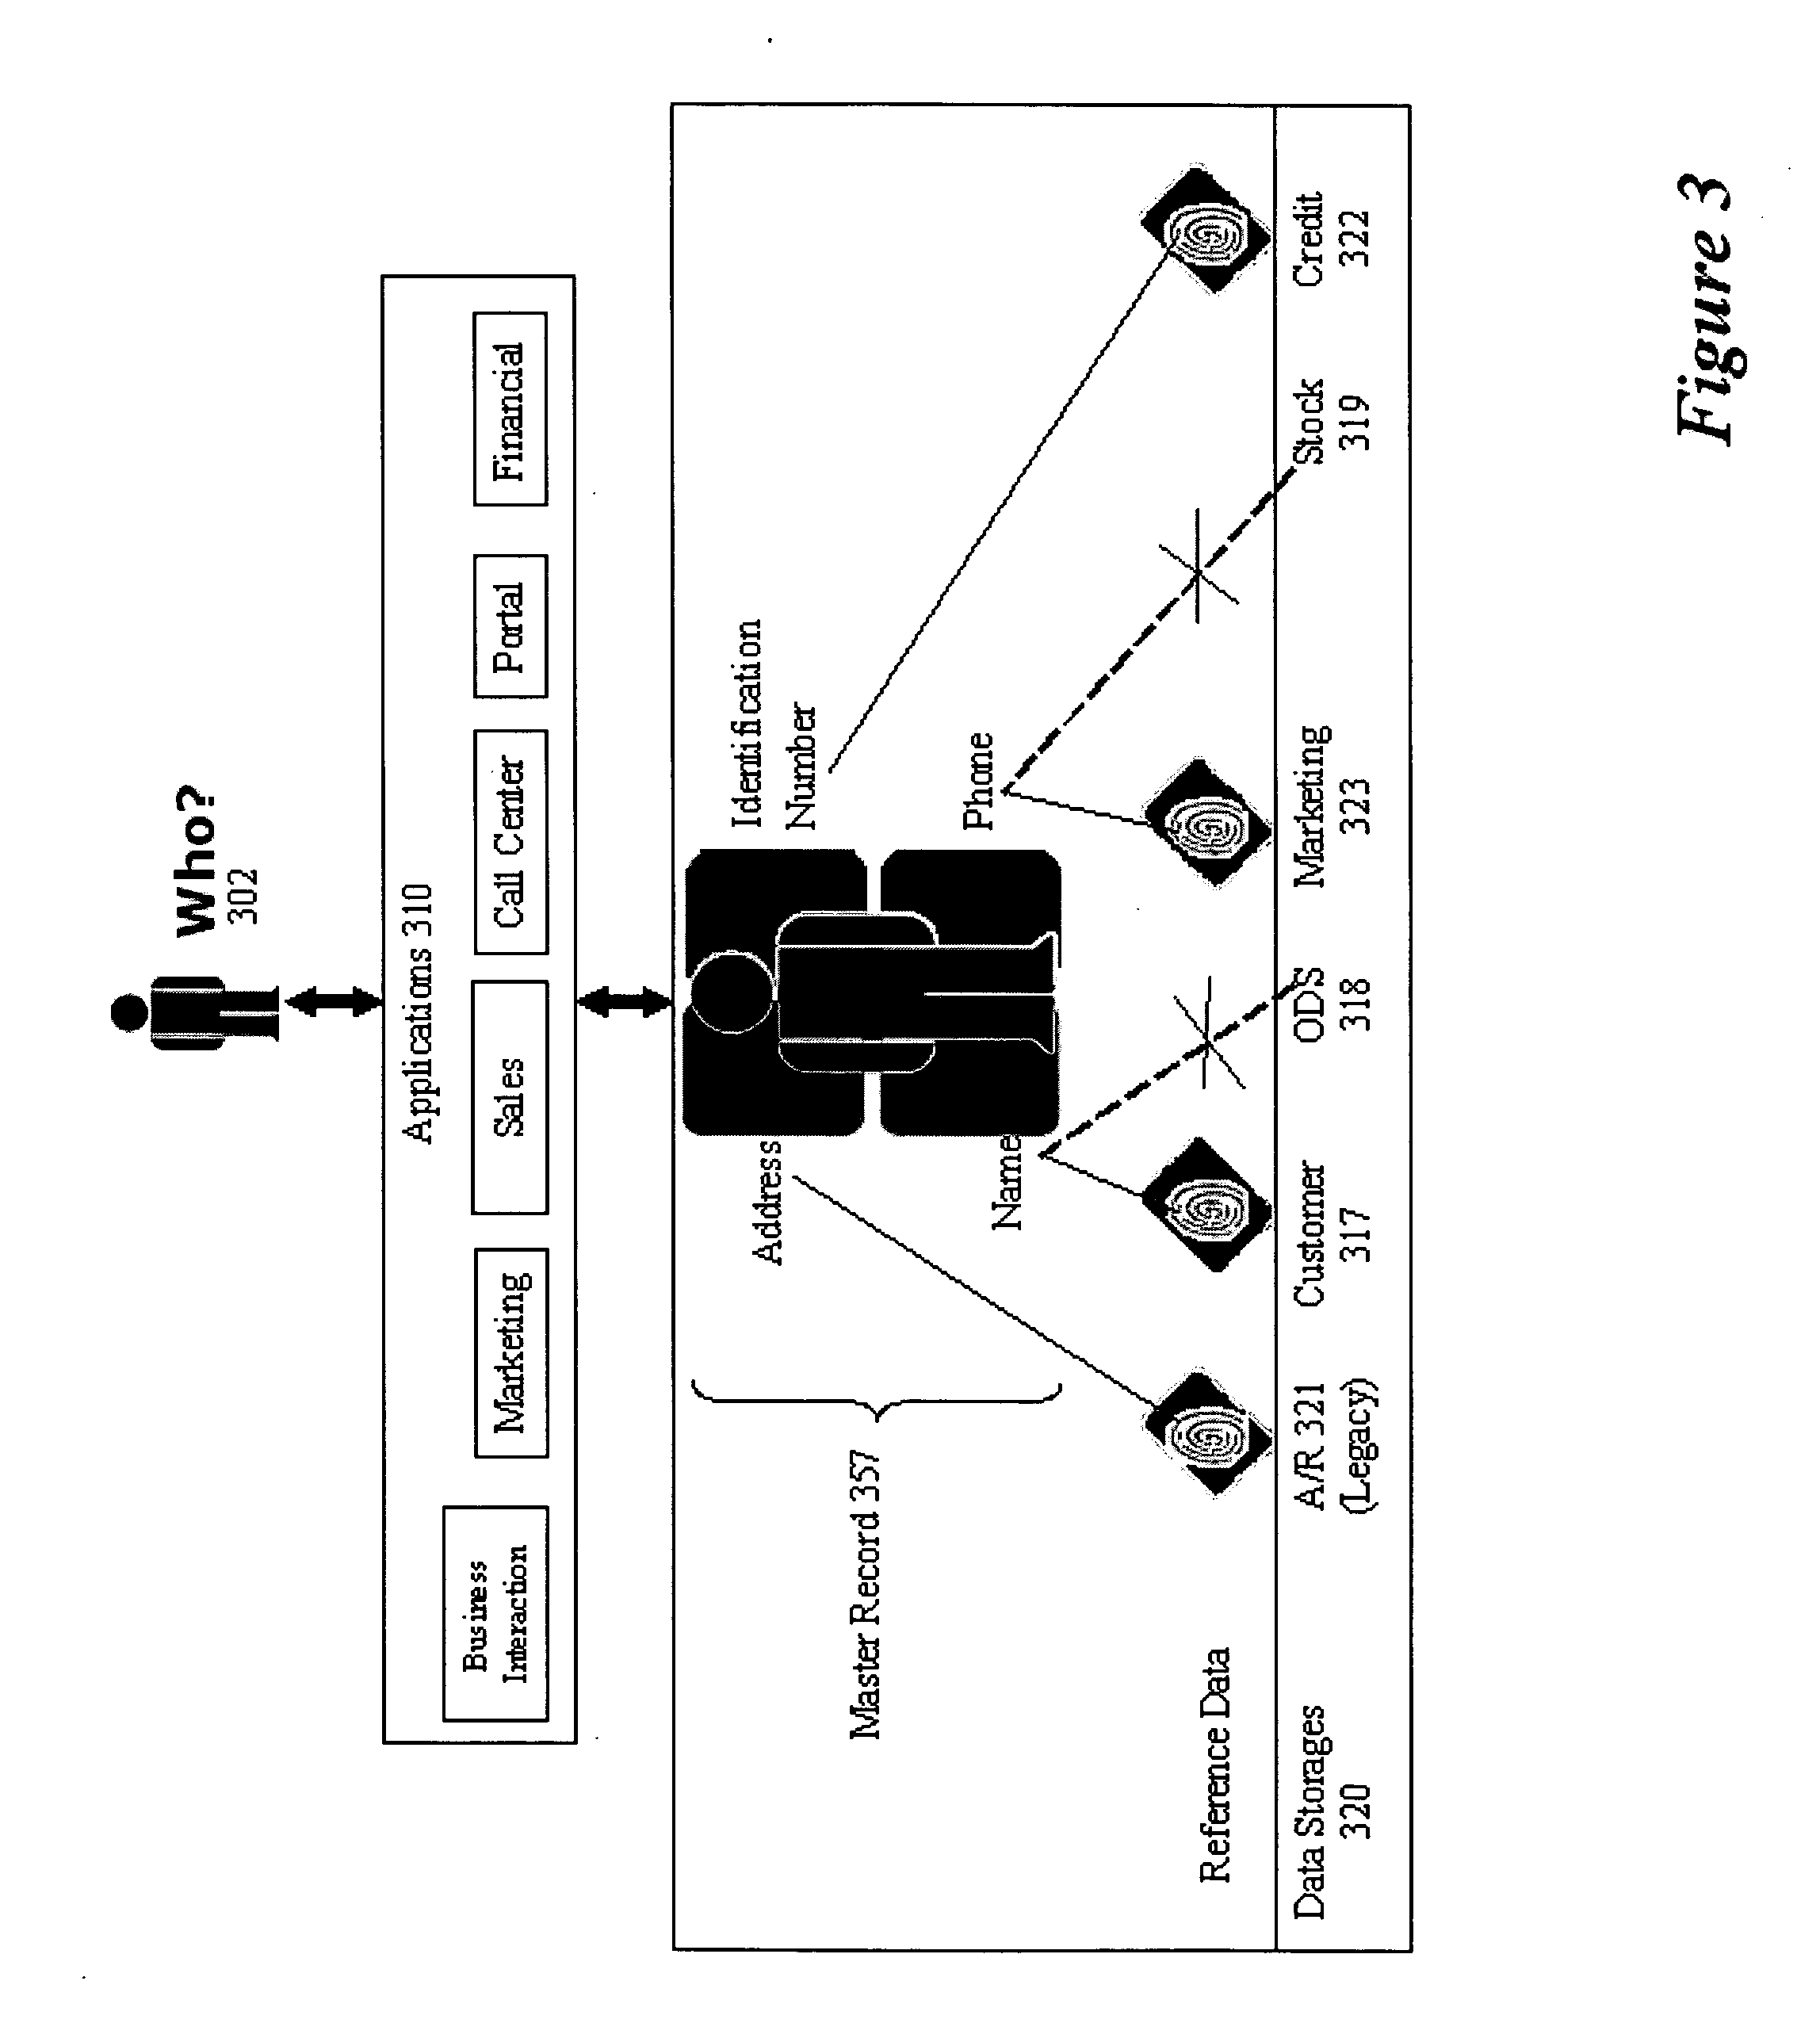 Method and apparatus for data integration and management